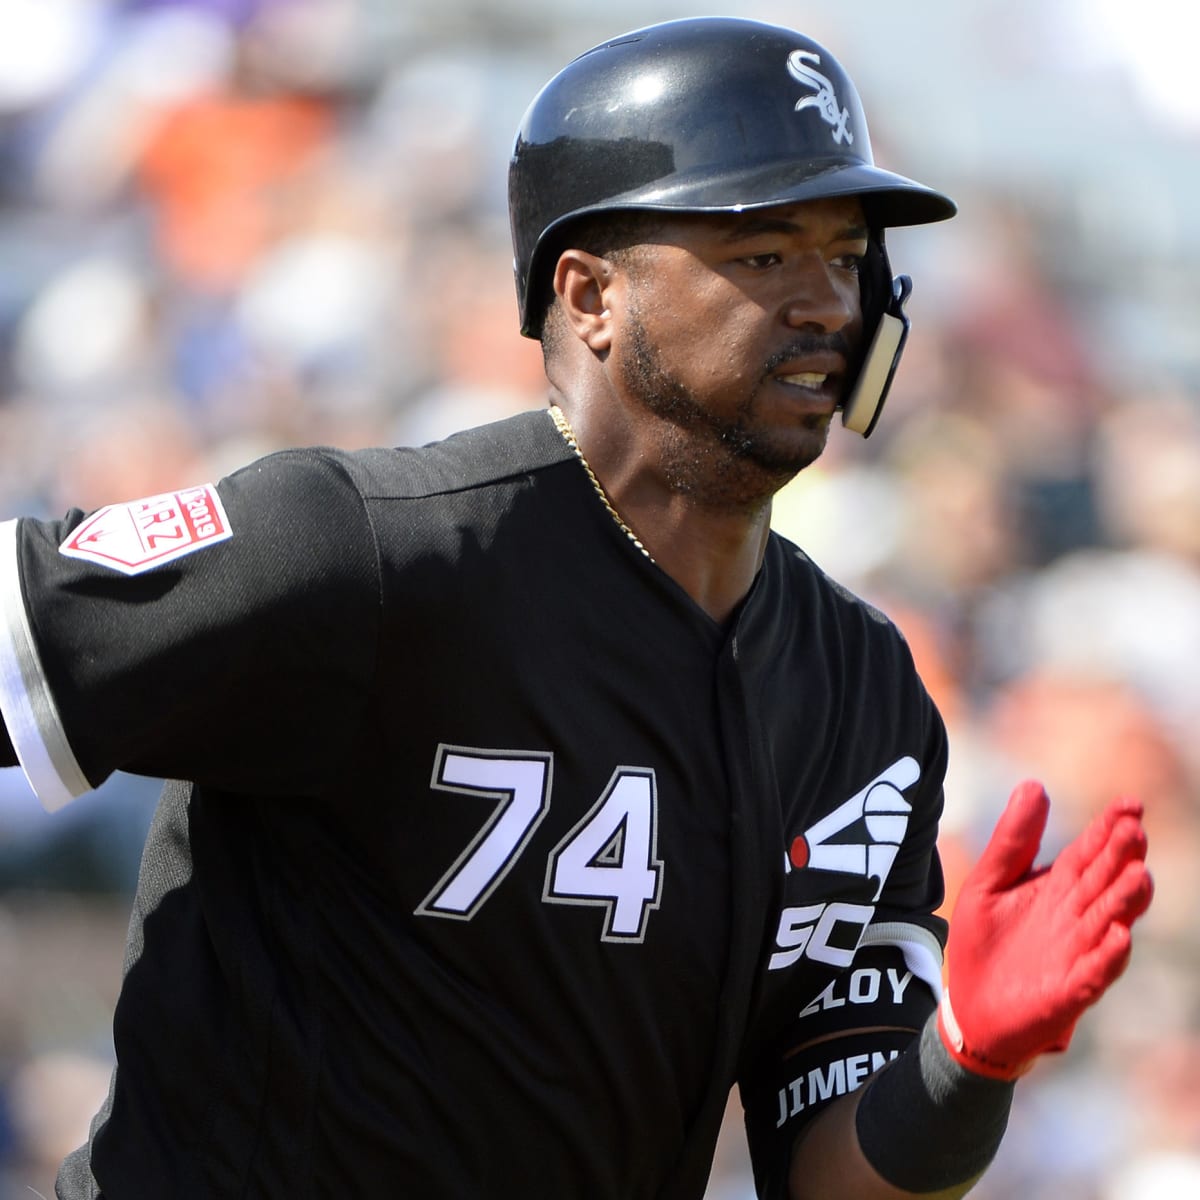 Eloy Jimenez signs long-term deal with White Sox, expected to play opening  day